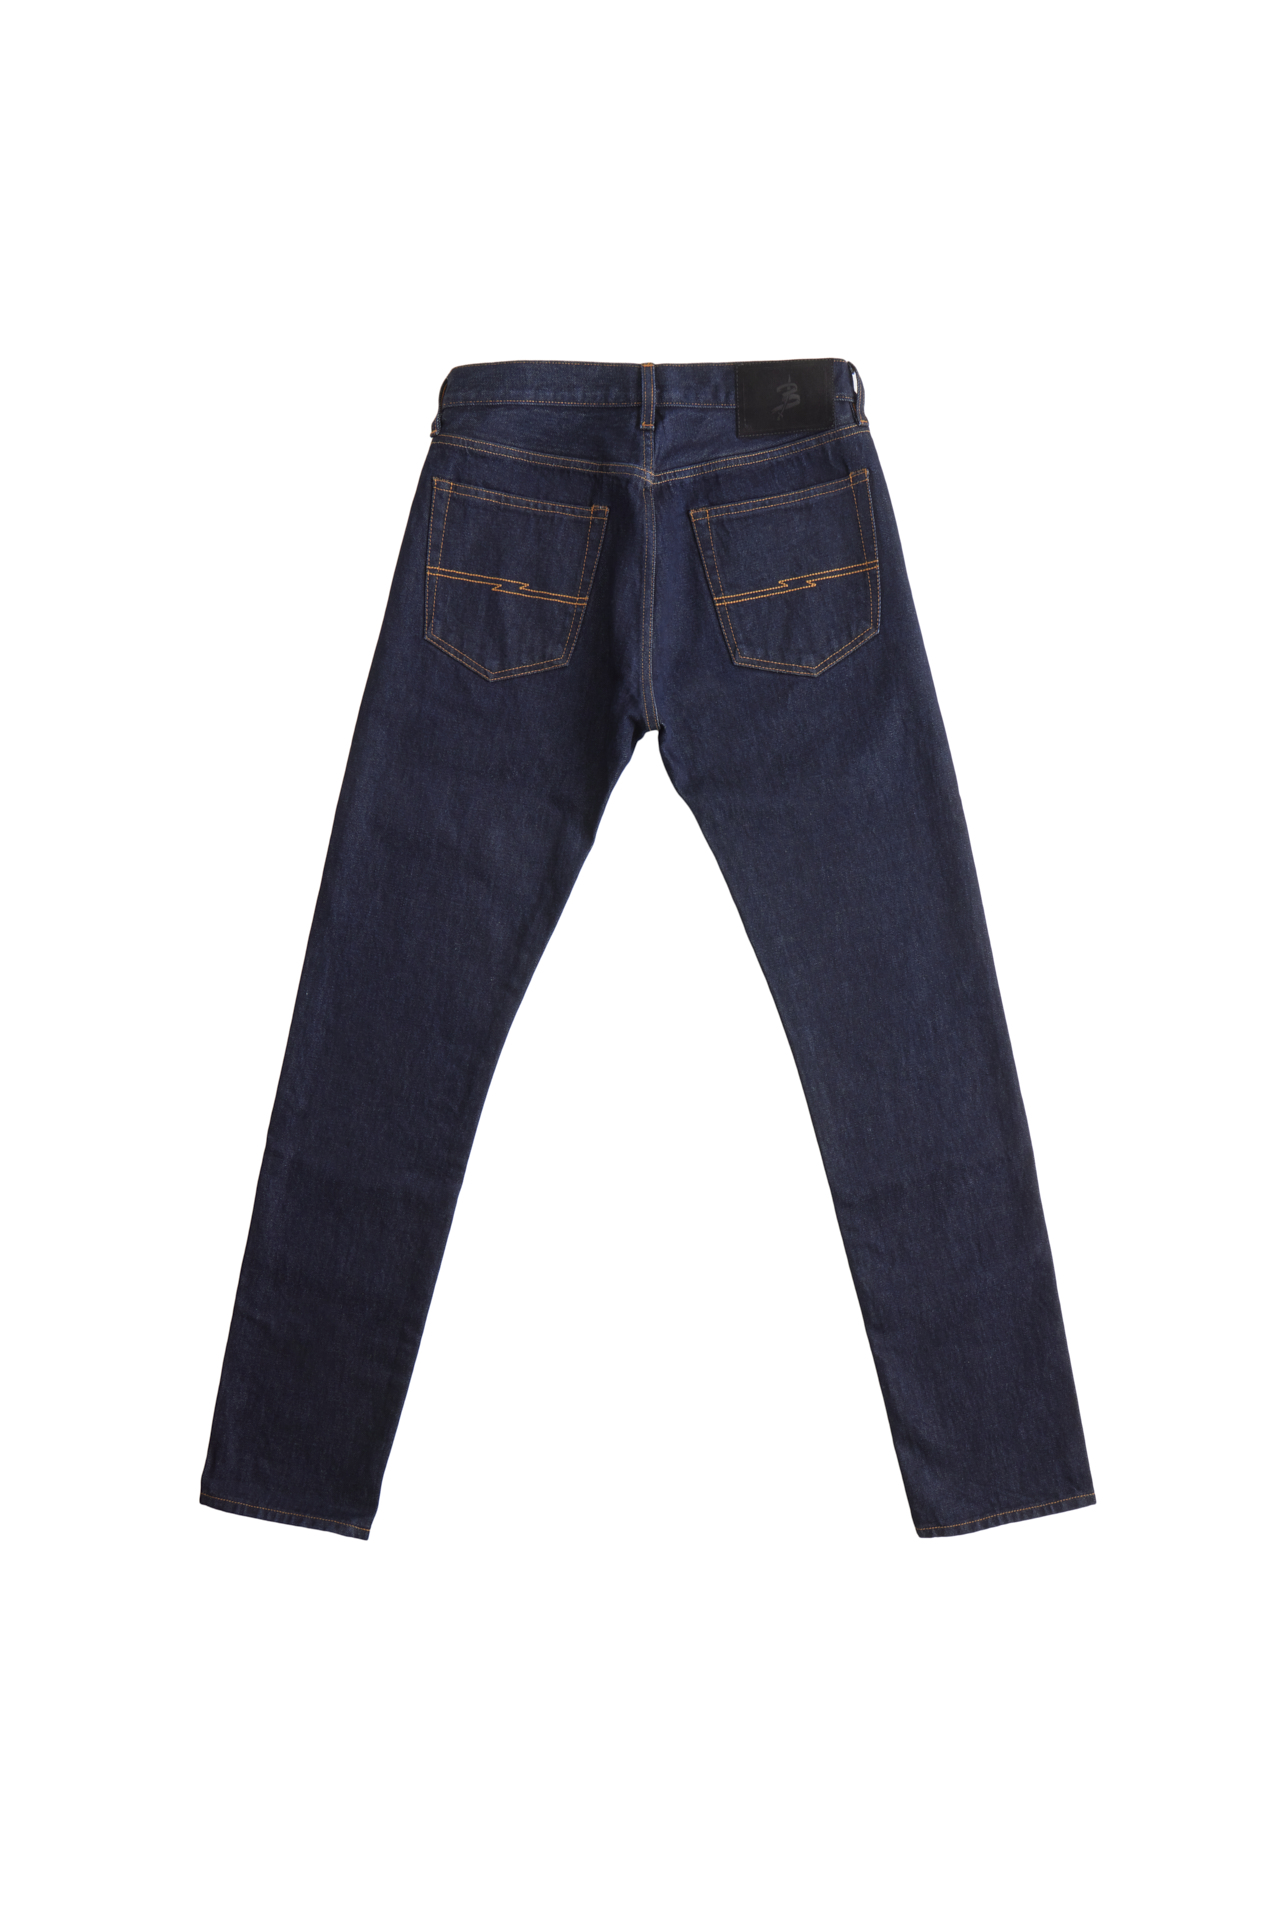 Buy Peter England Kids Dark Blue Solid Jeans for Boys Clothing Online @  Tata CLiQ